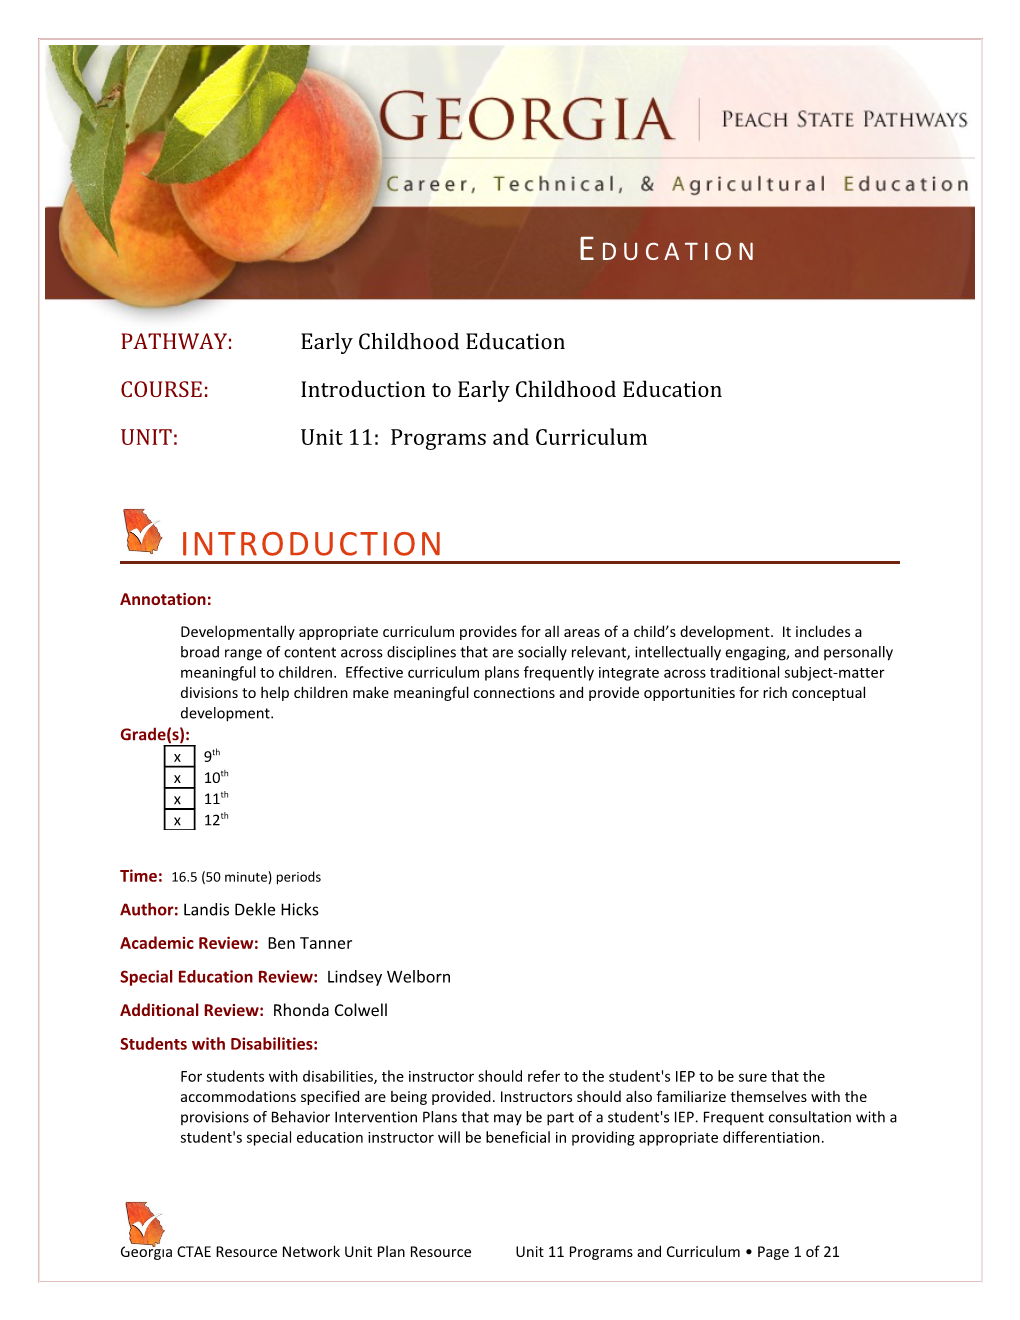 PATHWAY: Early Childhood Education